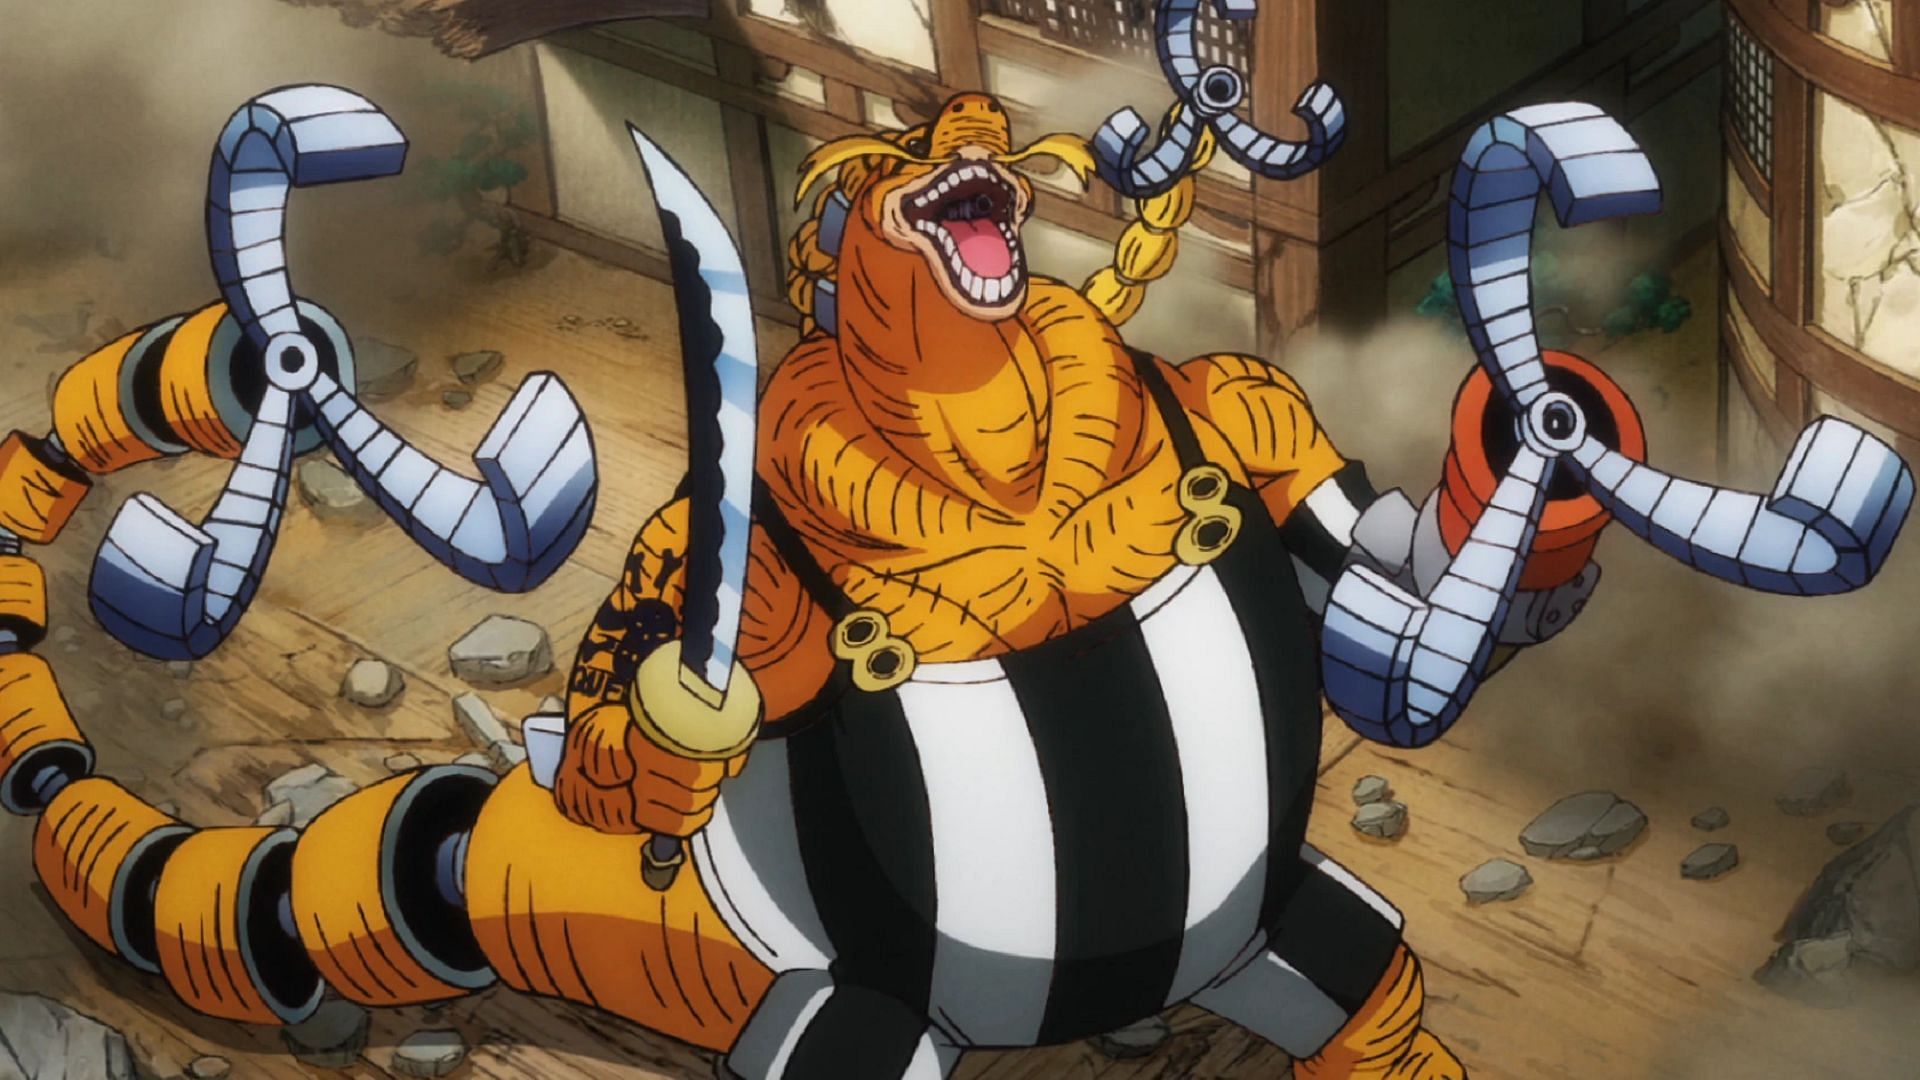 In One Piece, who are the strongest Zoan type users, and who can